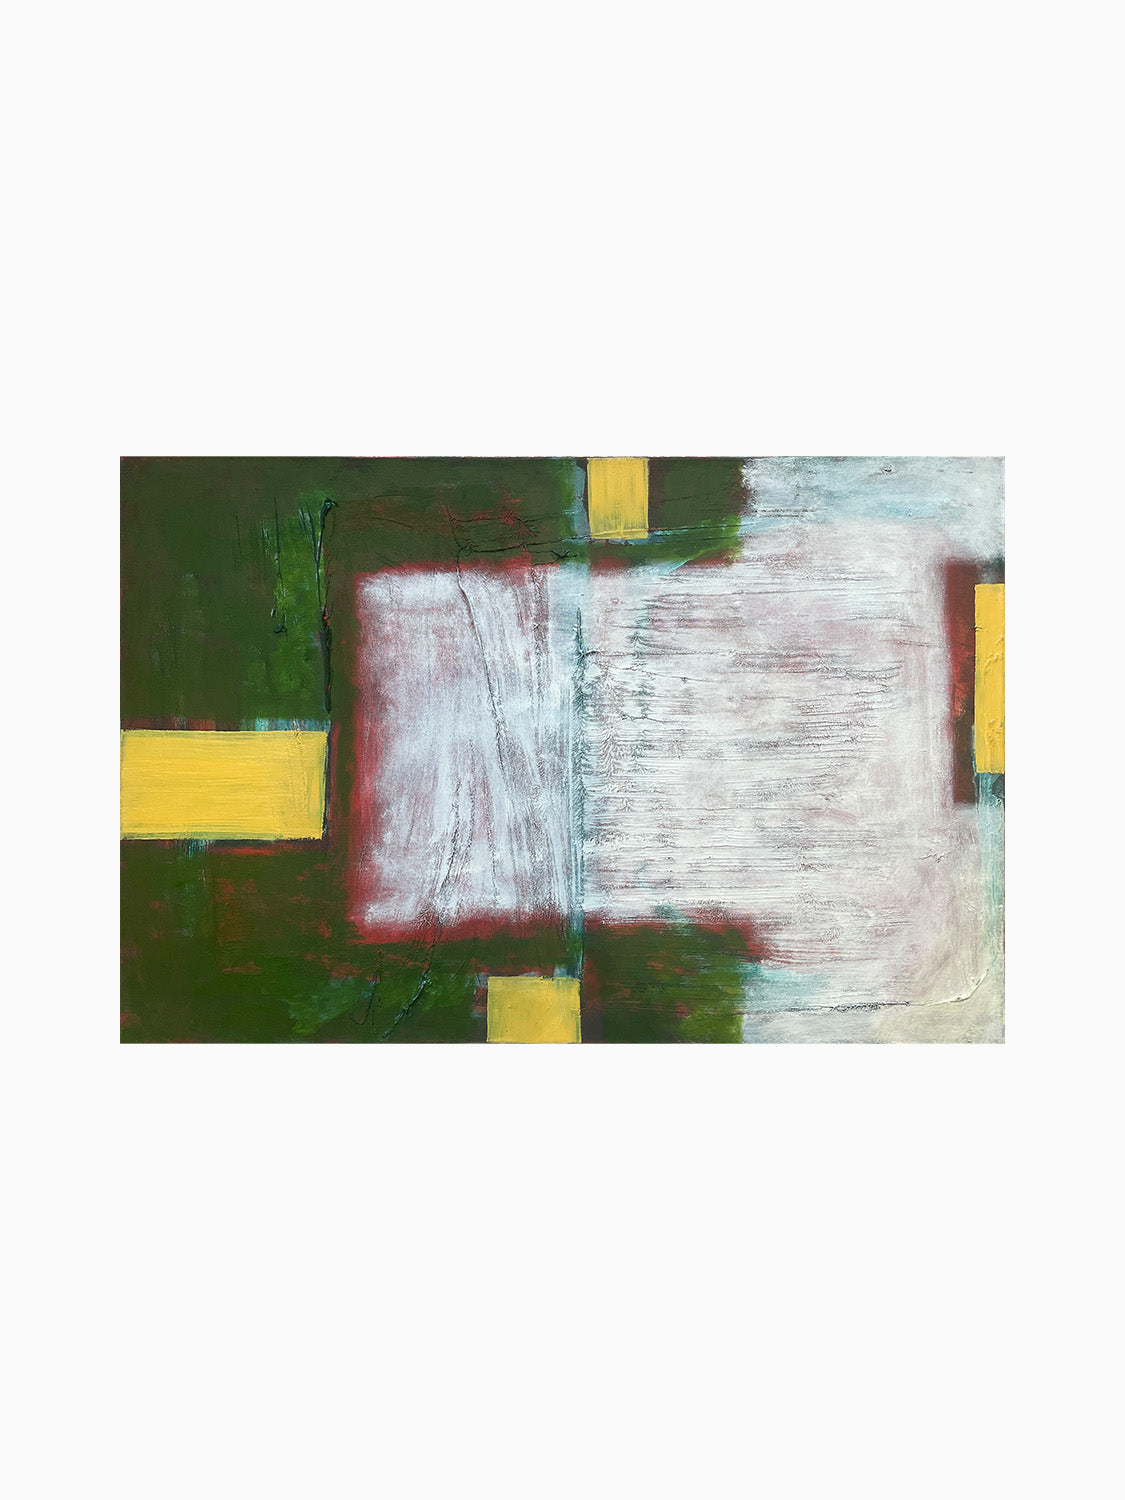 Untitled (four yellow rectangles, green field, white field, red in between)